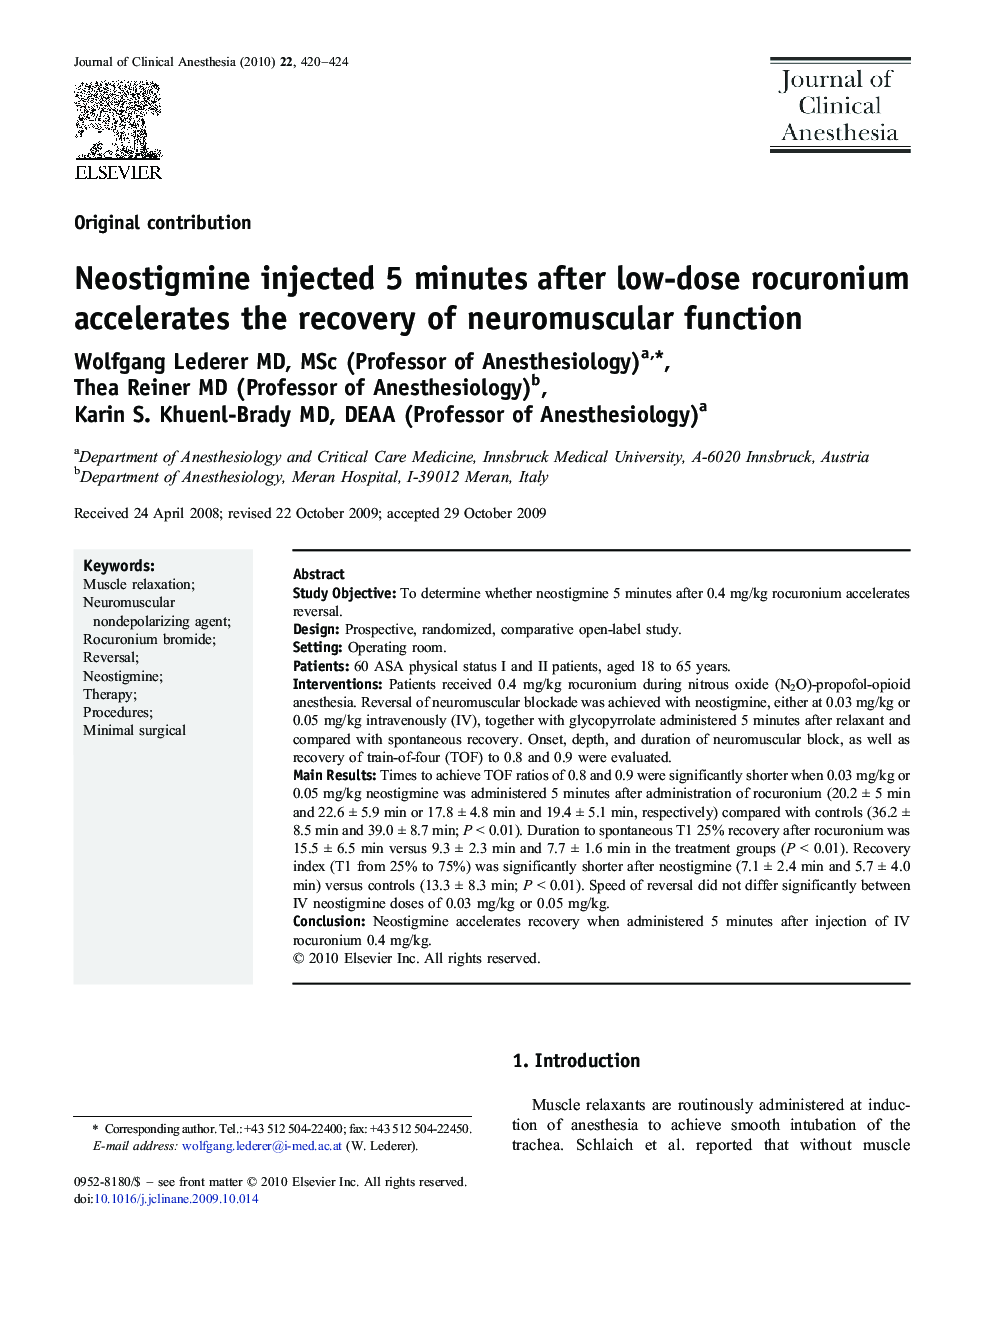 Neostigmine injected 5 minutes after low-dose rocuronium accelerates the recovery of neuromuscular function